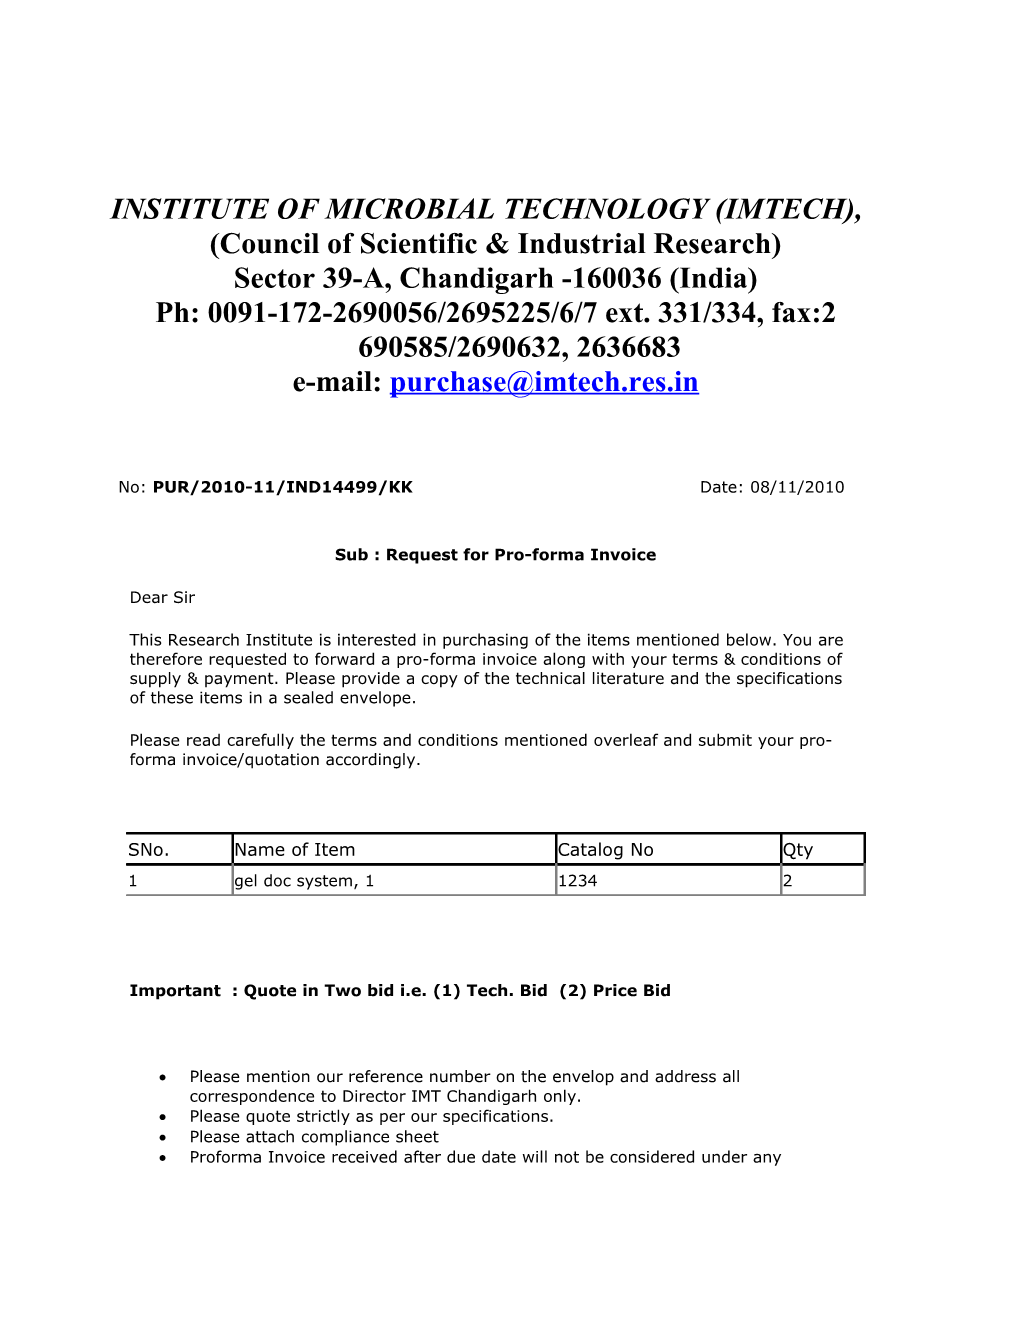 Institute of Microbial Technology (Imtech)